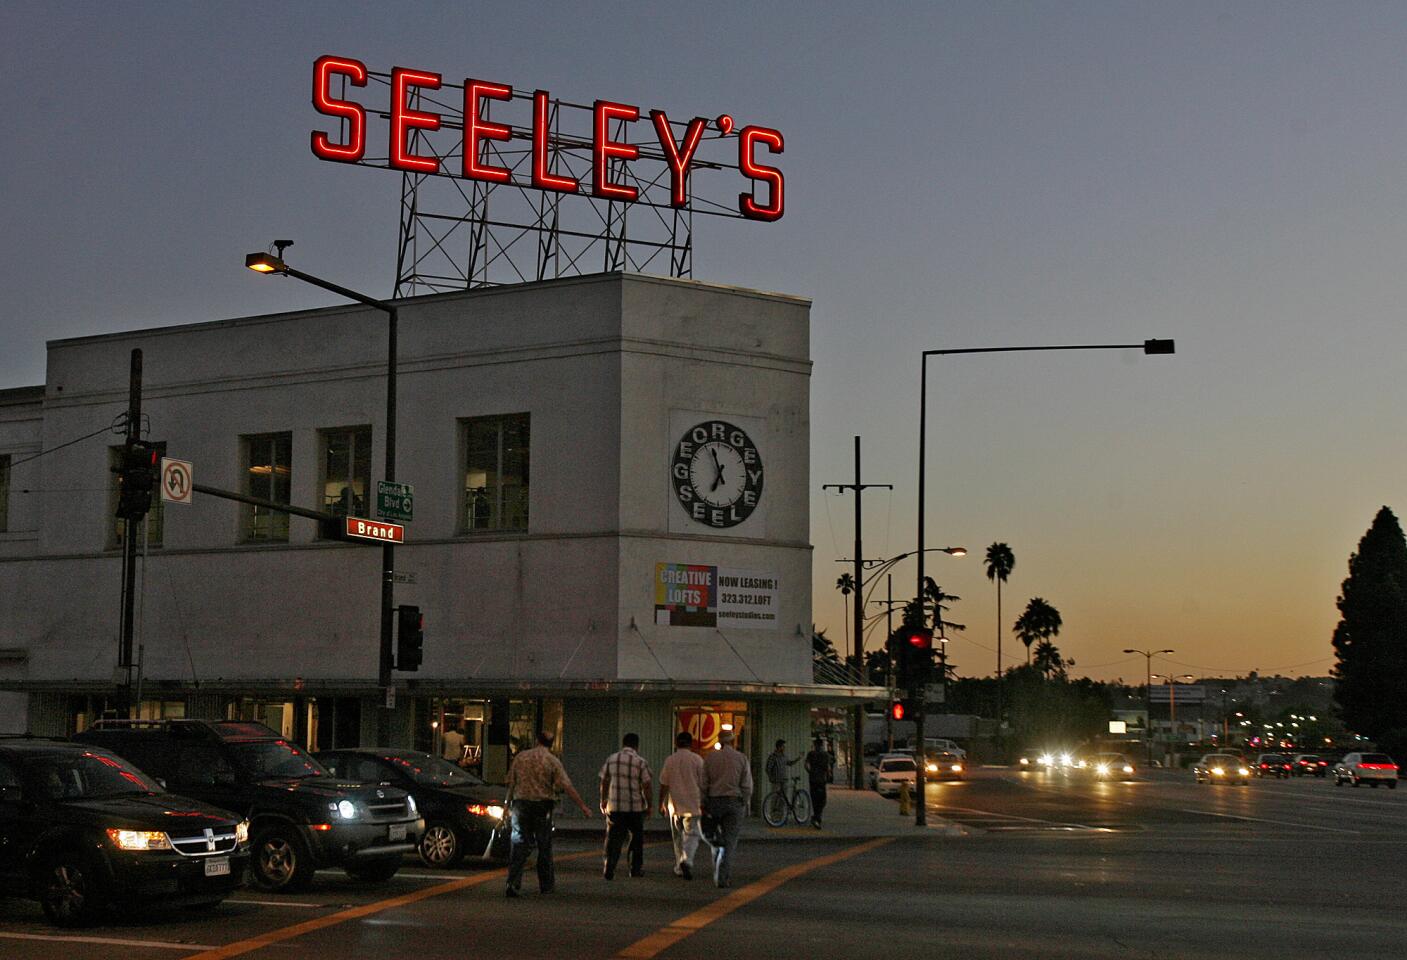 The illuminated Seeley's sign atop the Seeley Building in Glendale.